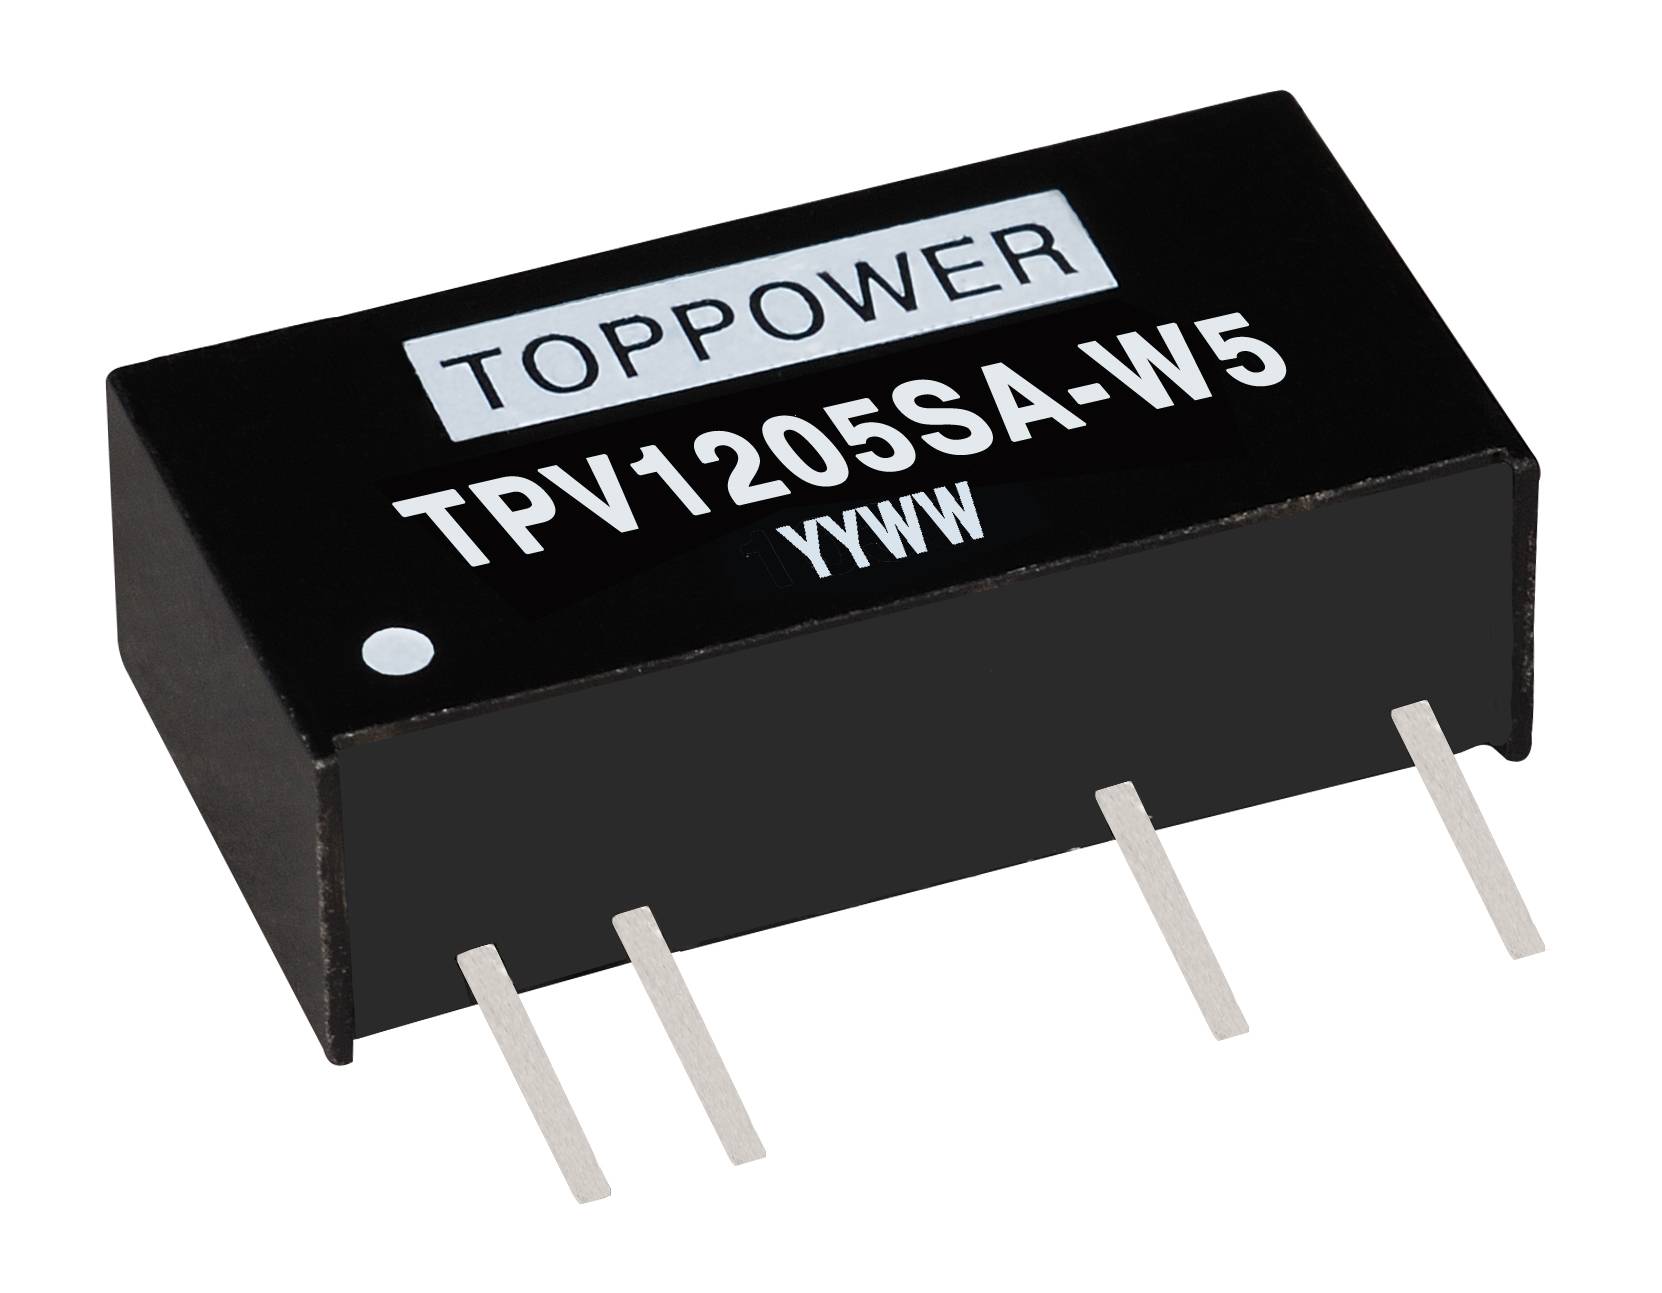 Ia0505s DC DC. 5 V out/in. Soft Switching Converters. Type of Power Converters. Конвертеры электронных